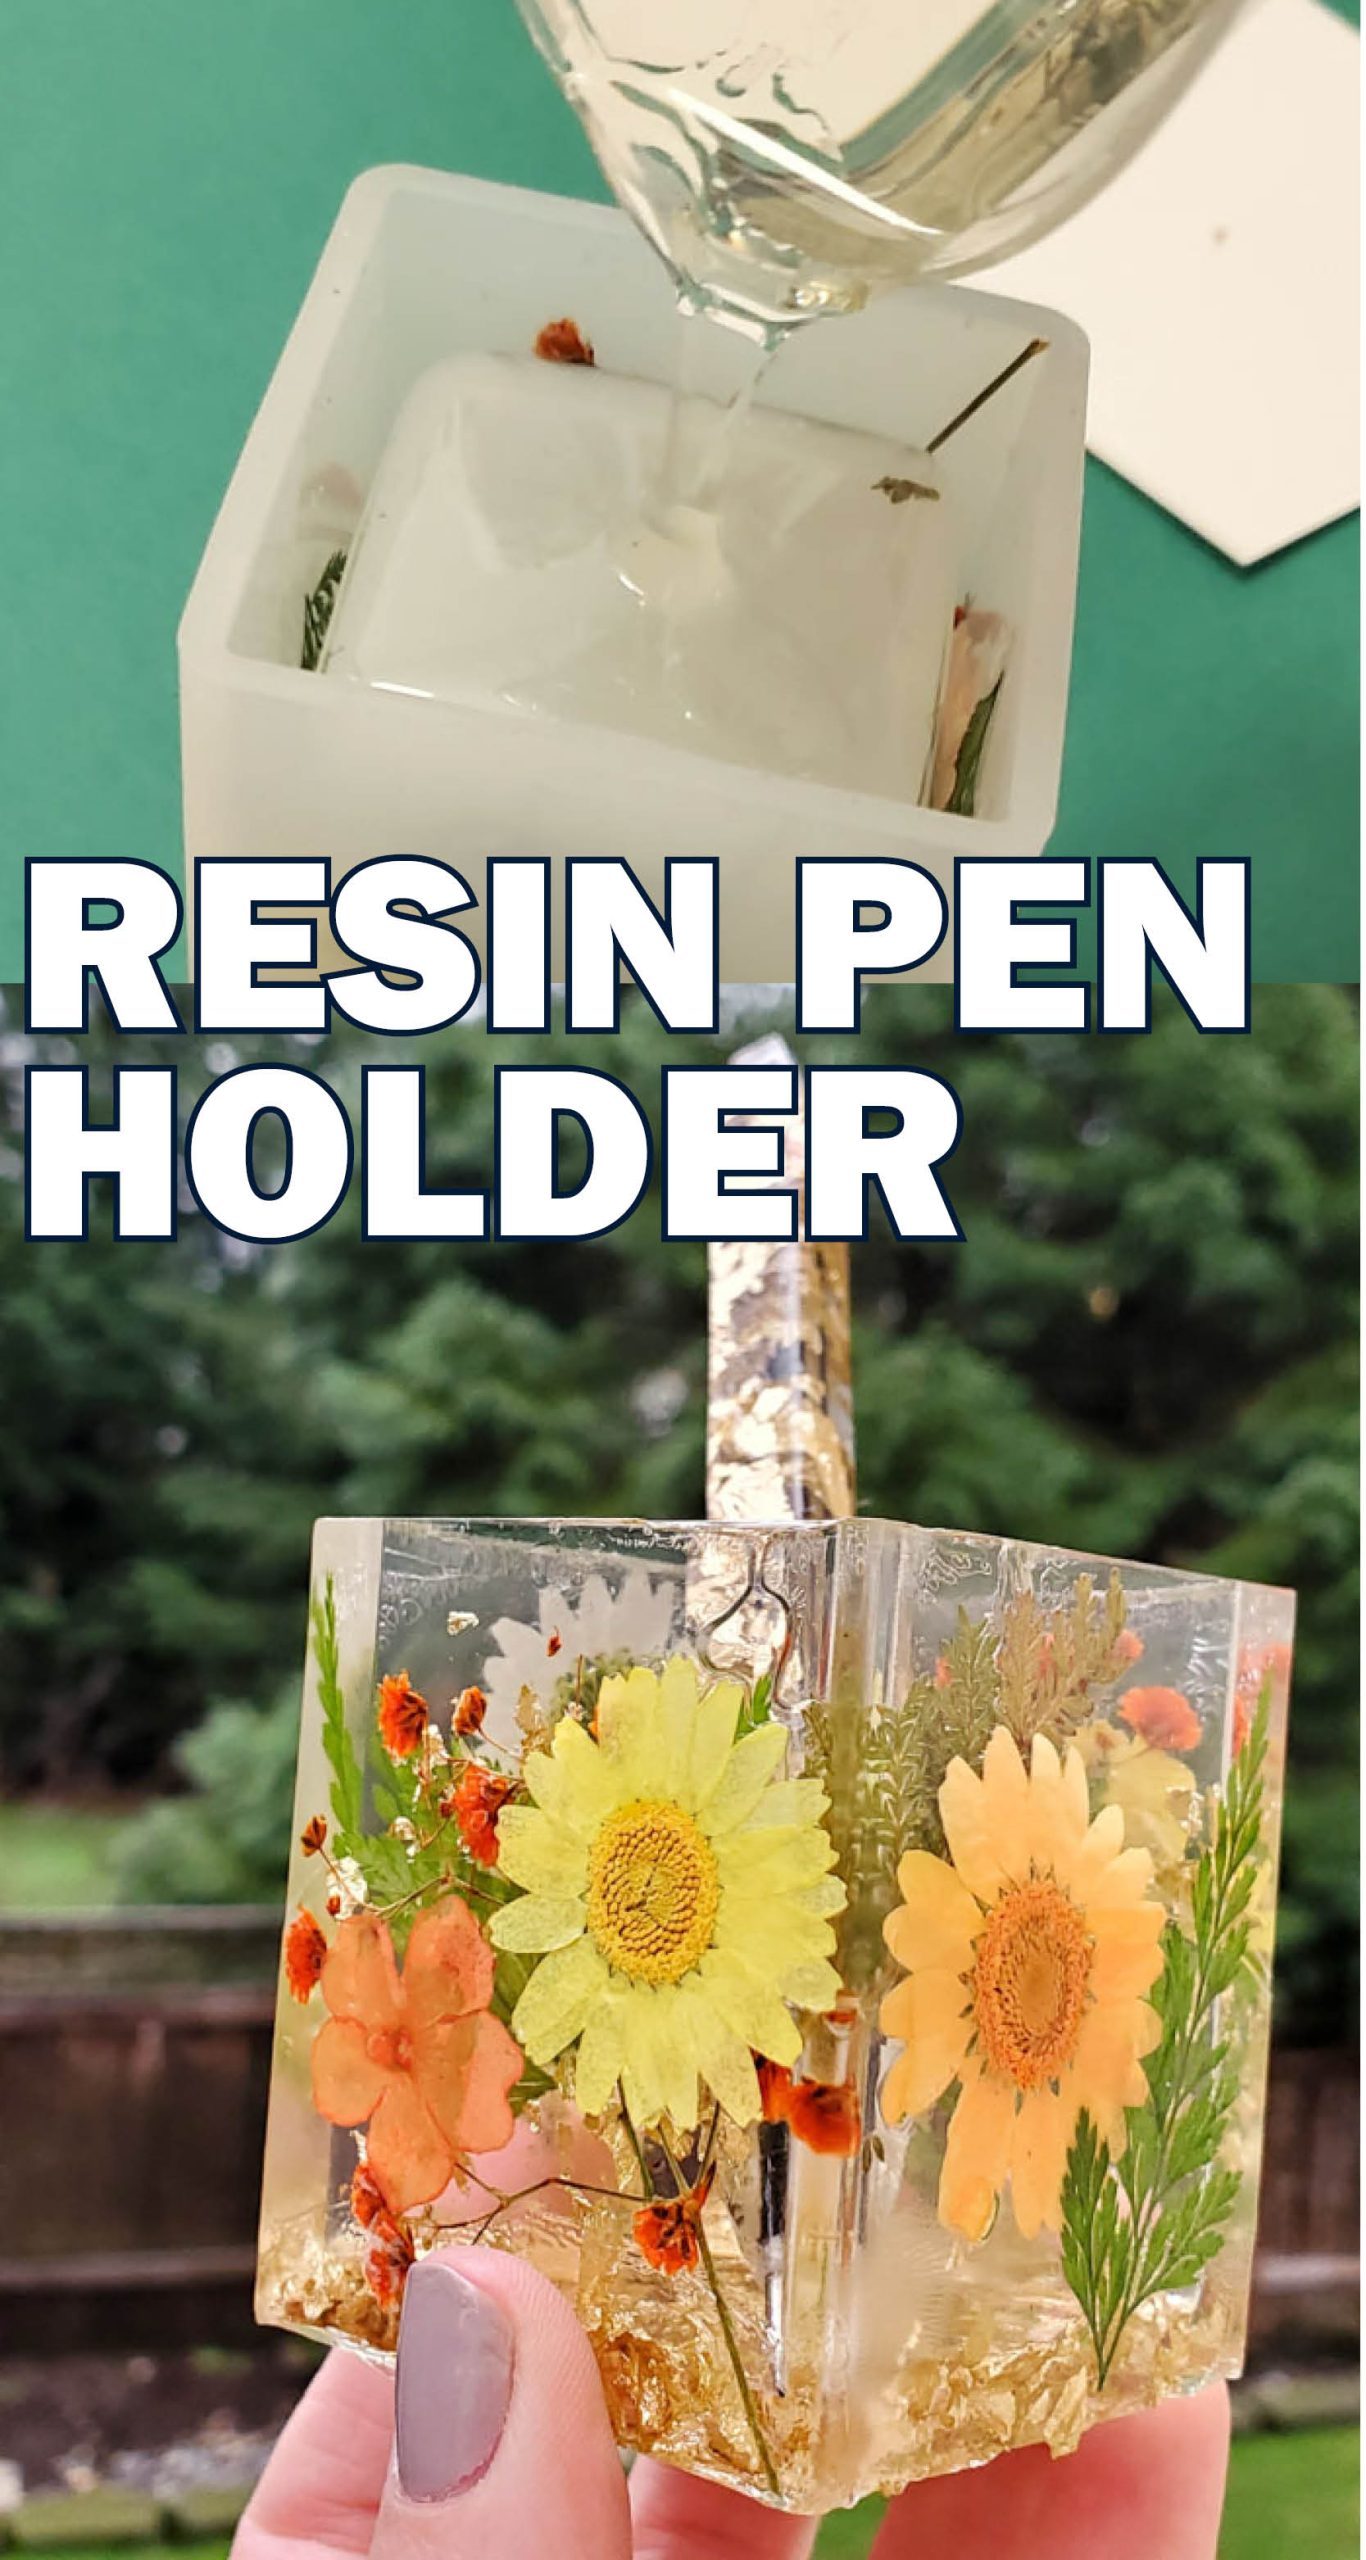 Using the small cup molds that came in the same set to make resin pens, I made pen holders with polyester resin. via @resincraftsblog